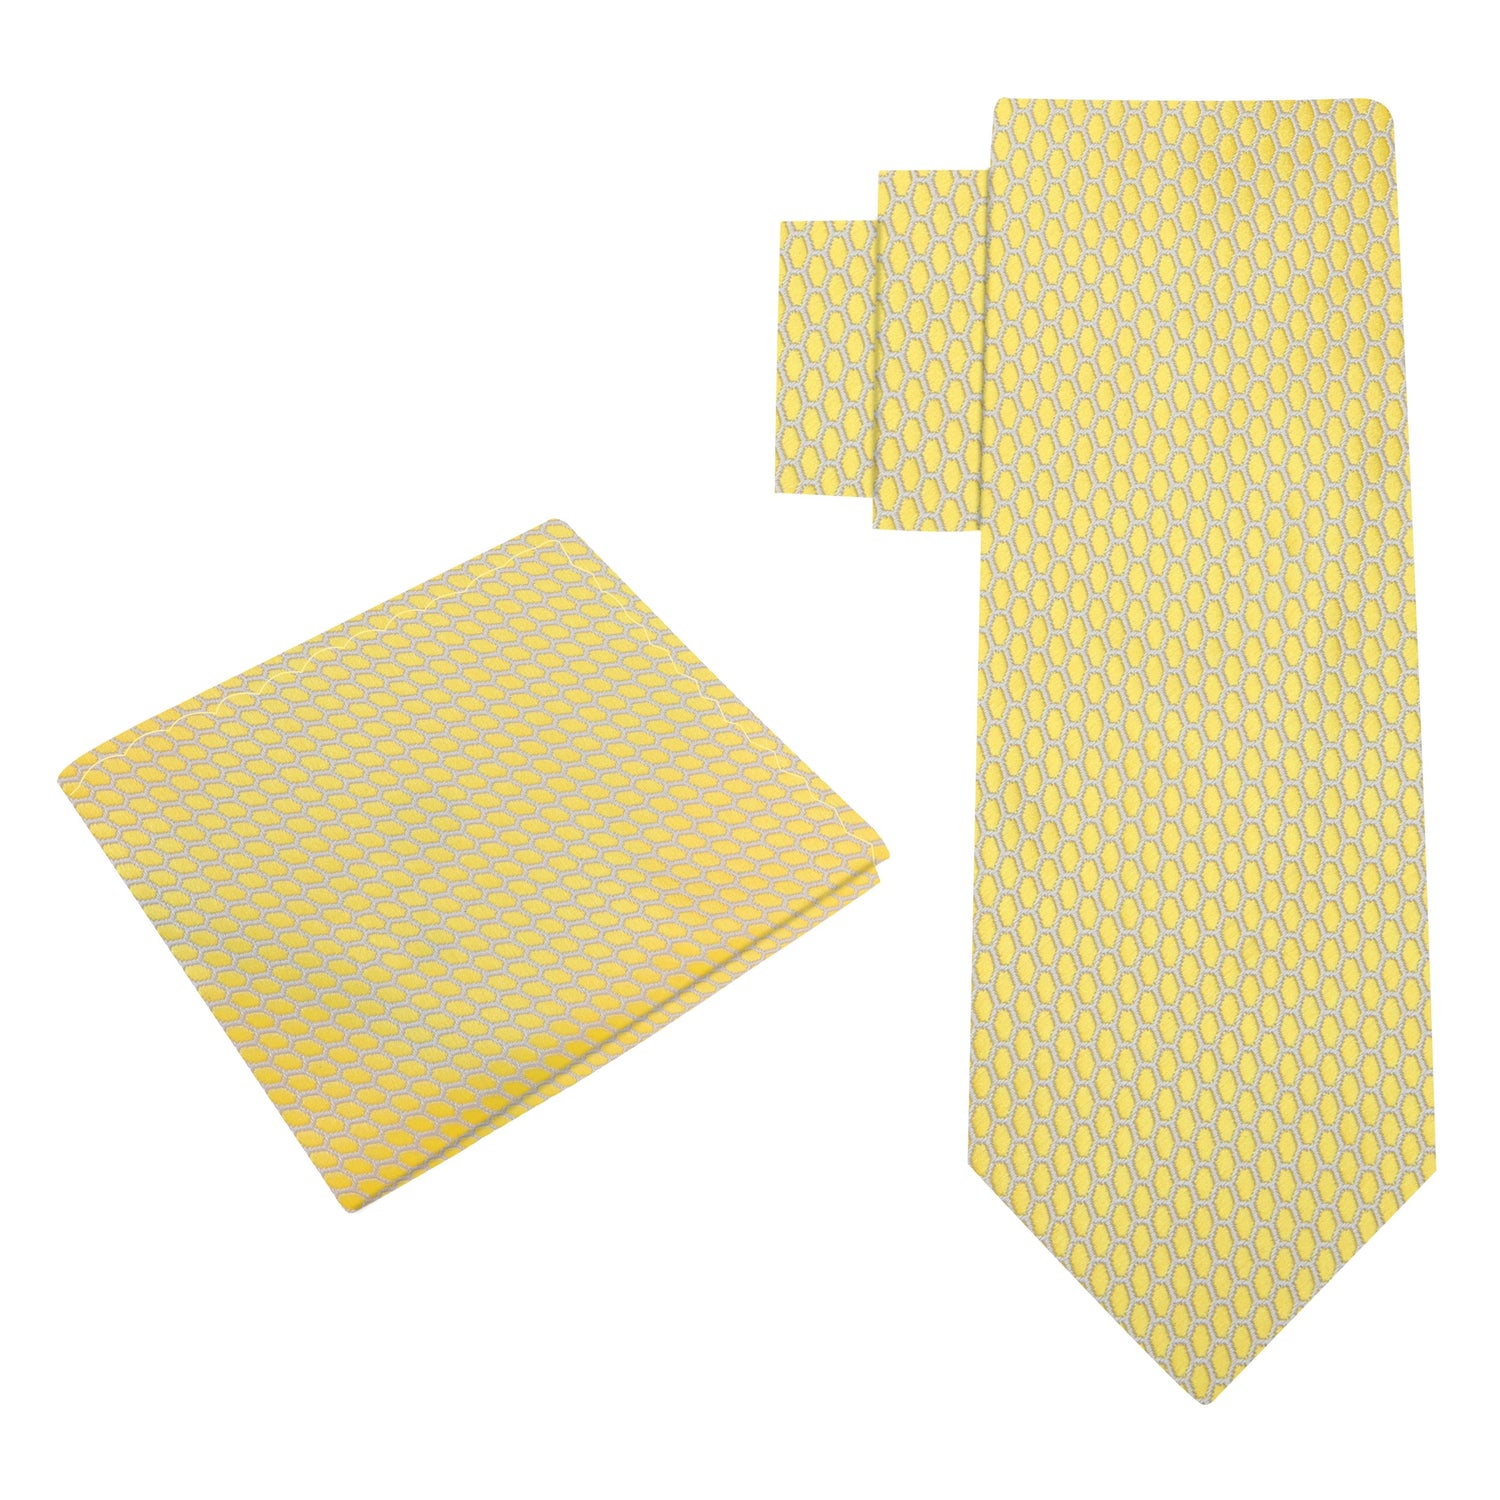 Alt View: A Yellow, White Geometric Oval Shaped Pattern Silk Necktie, Matching Pocket Square|